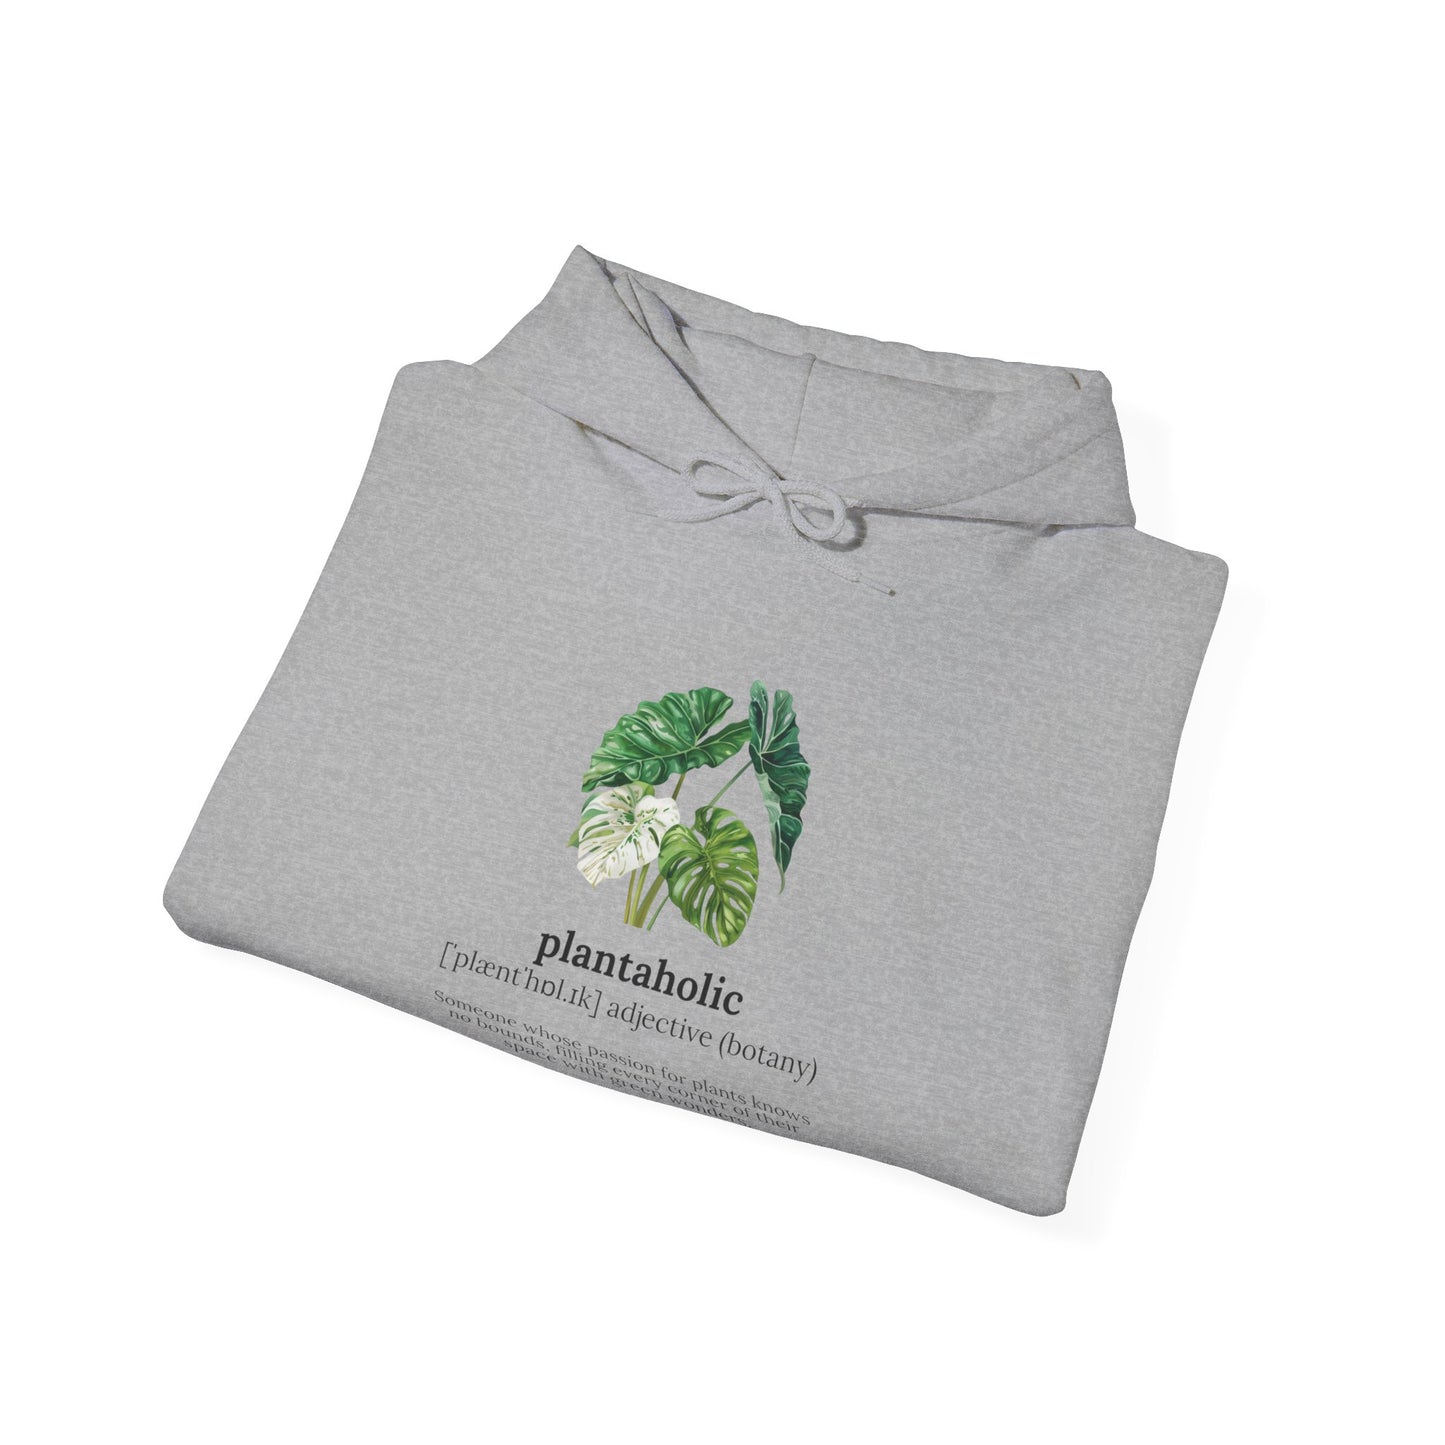 The Definition of Plantastic | unisex Hoodie